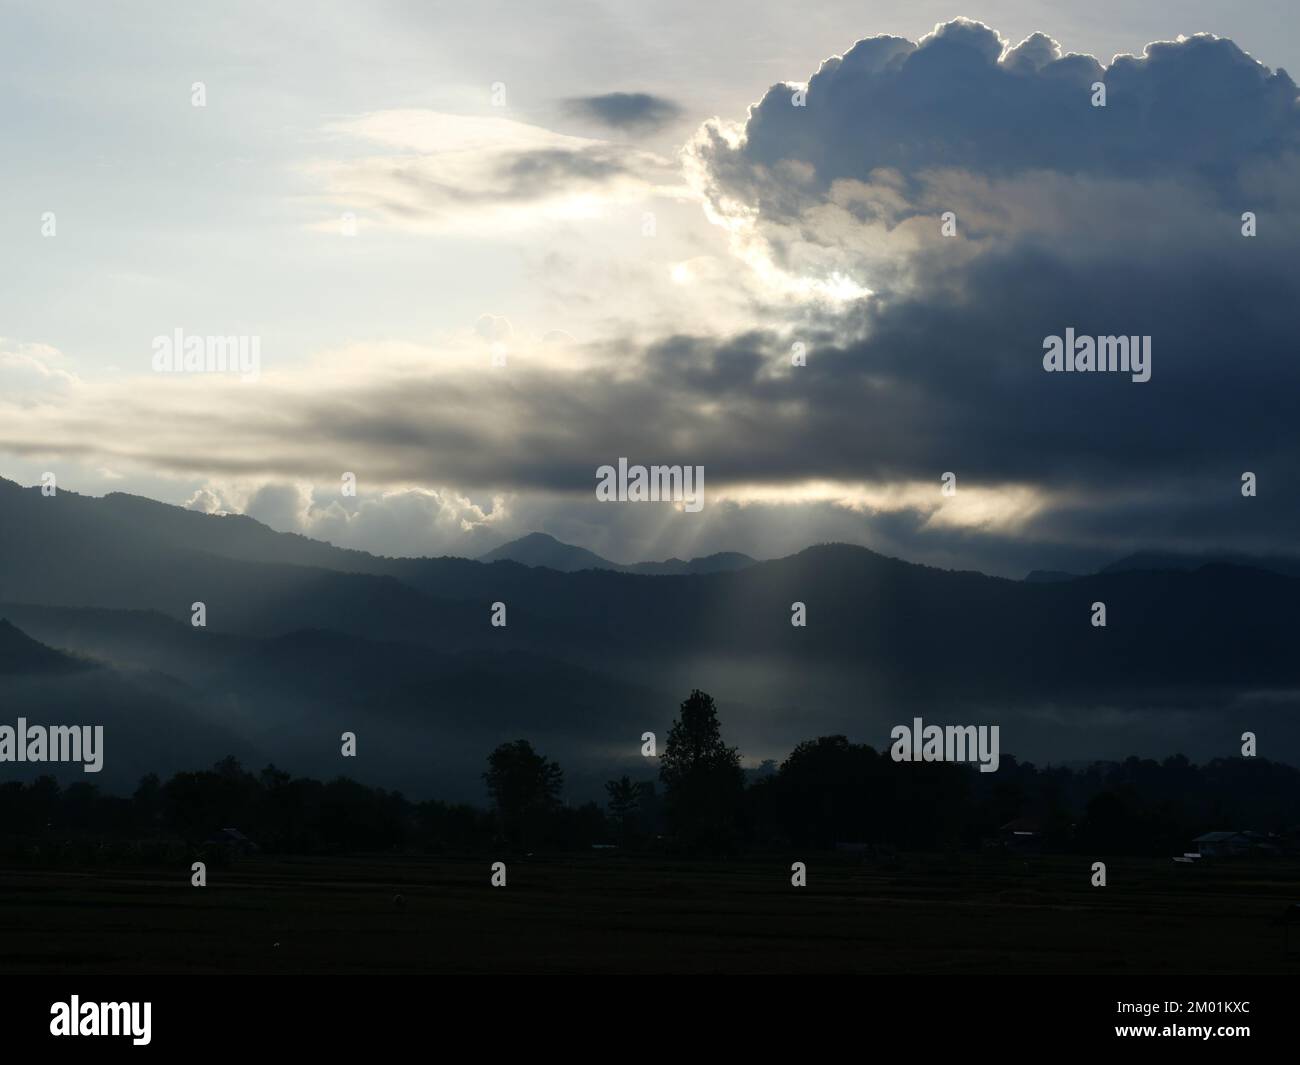 Silhouette of tree and mountain with sunbeam light shoot through the dark cloud to the land at sunrise, Mist covers the forest and mountains at dawn Stock Photo